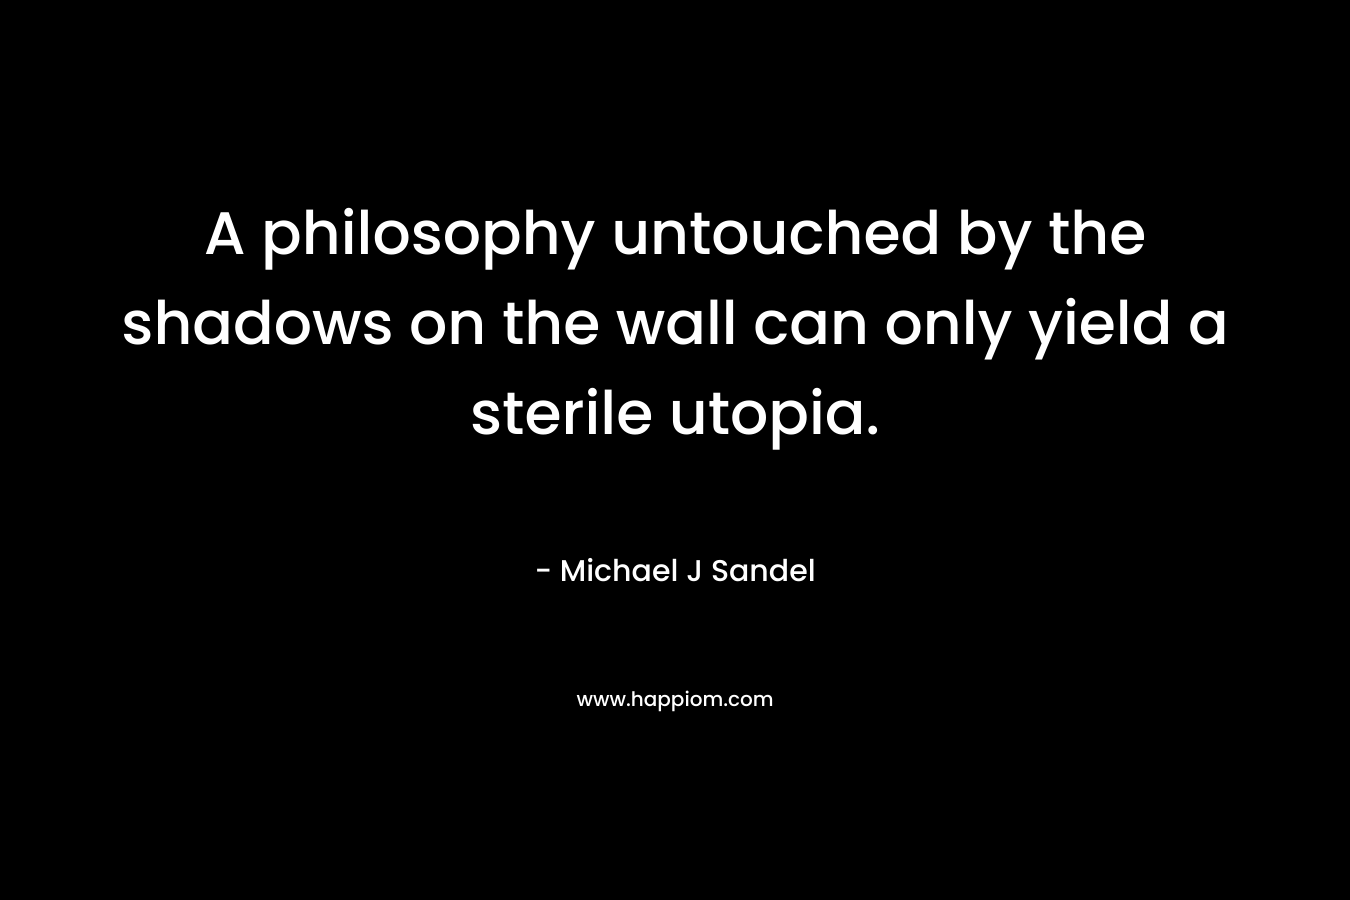 A philosophy untouched by the shadows on the wall can only yield a sterile utopia. – Michael J Sandel